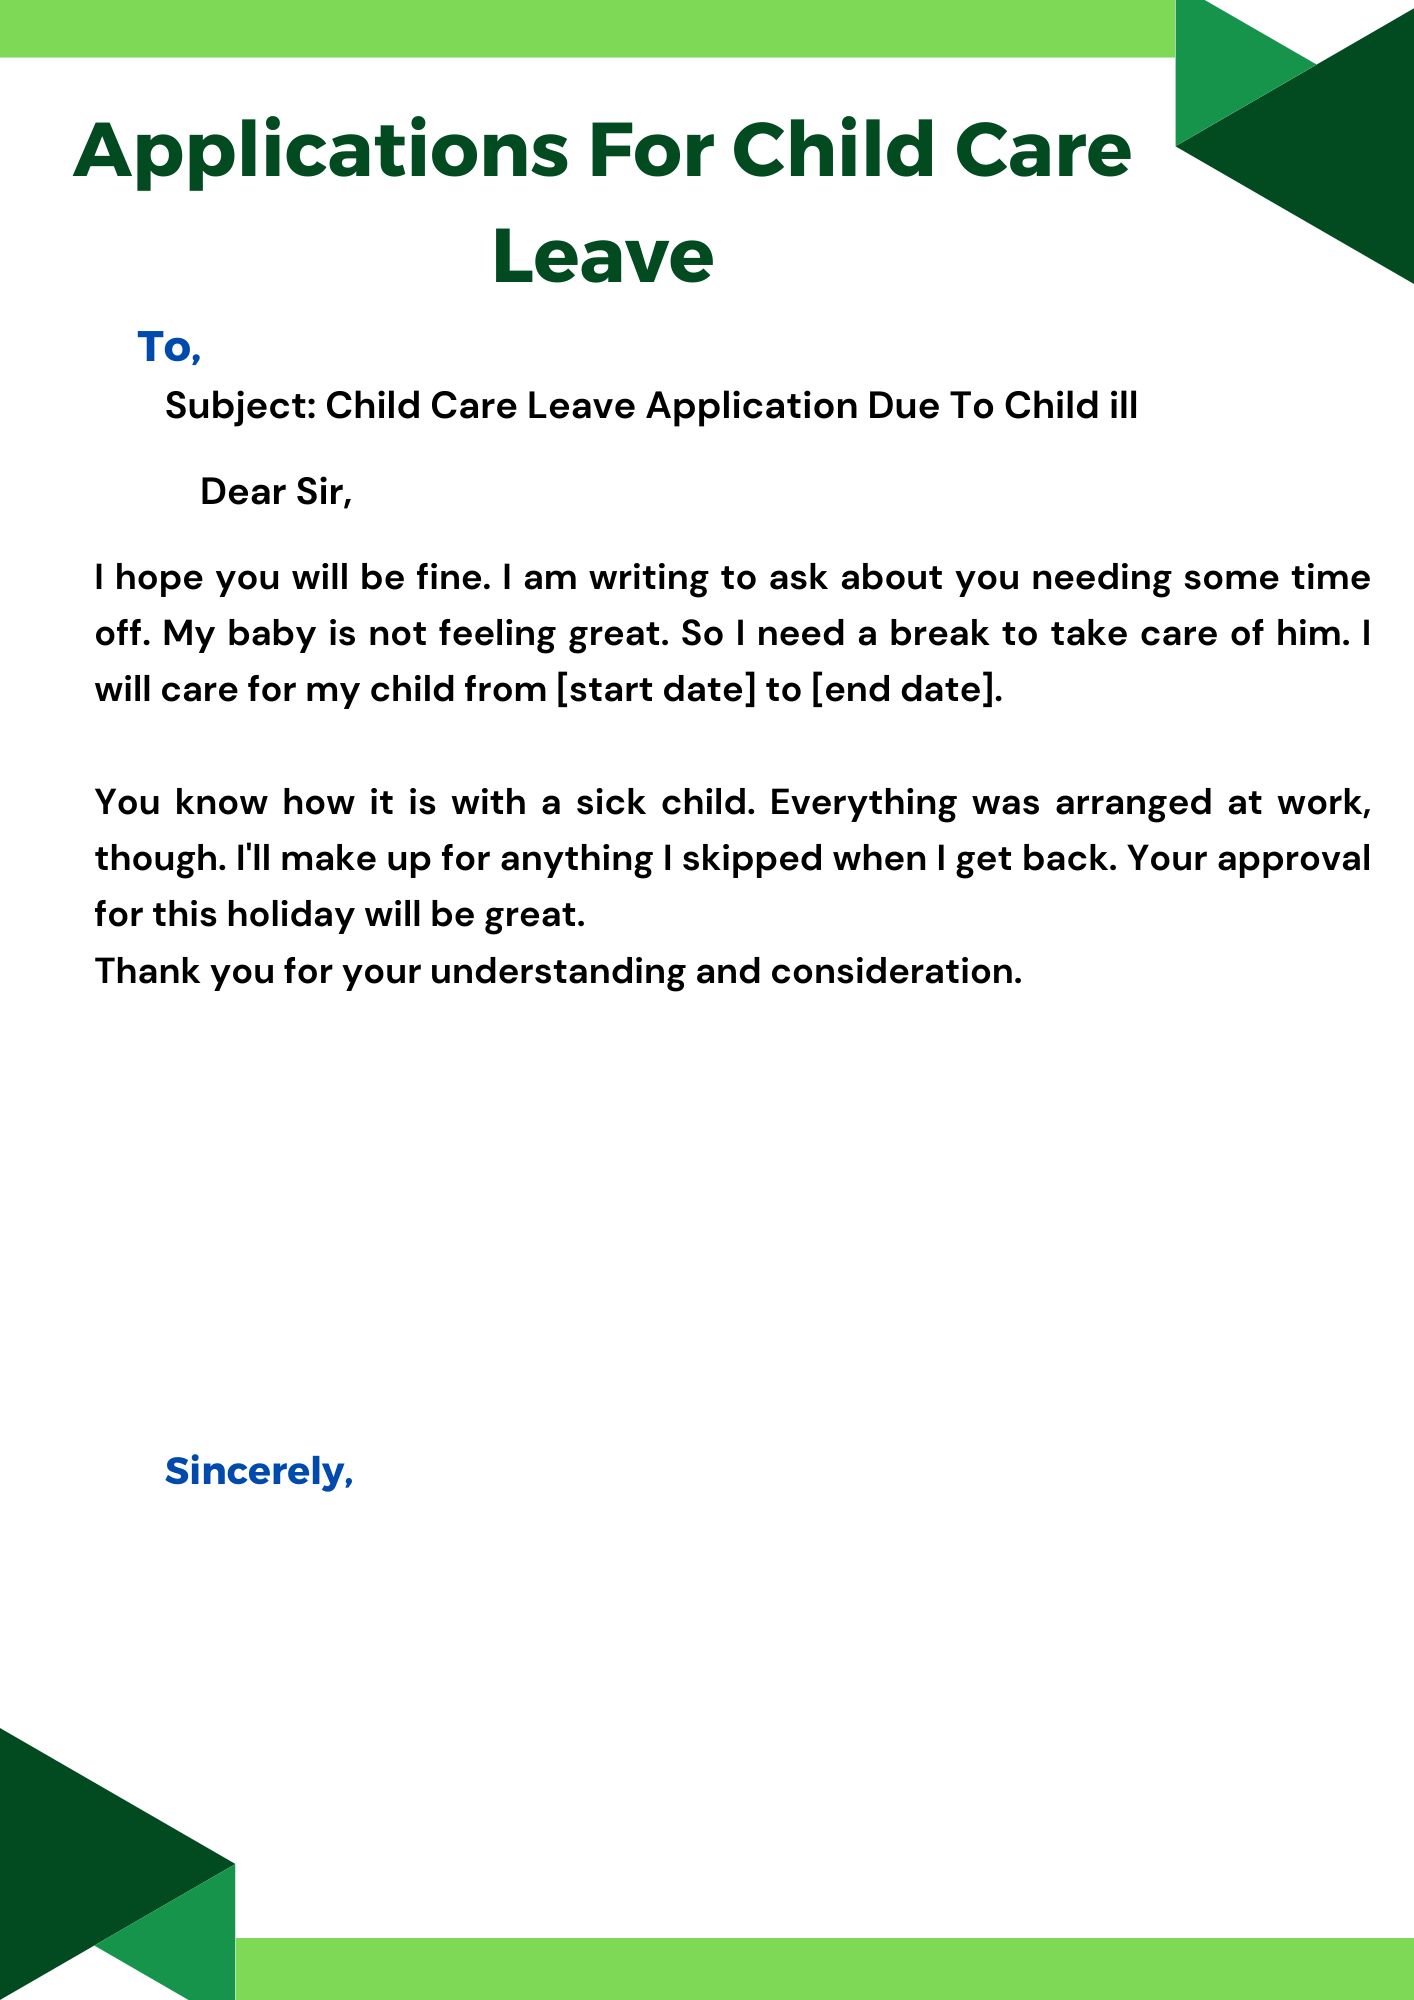 Application Letter For Child Care Leave Due To Child Ill (Sample-5)